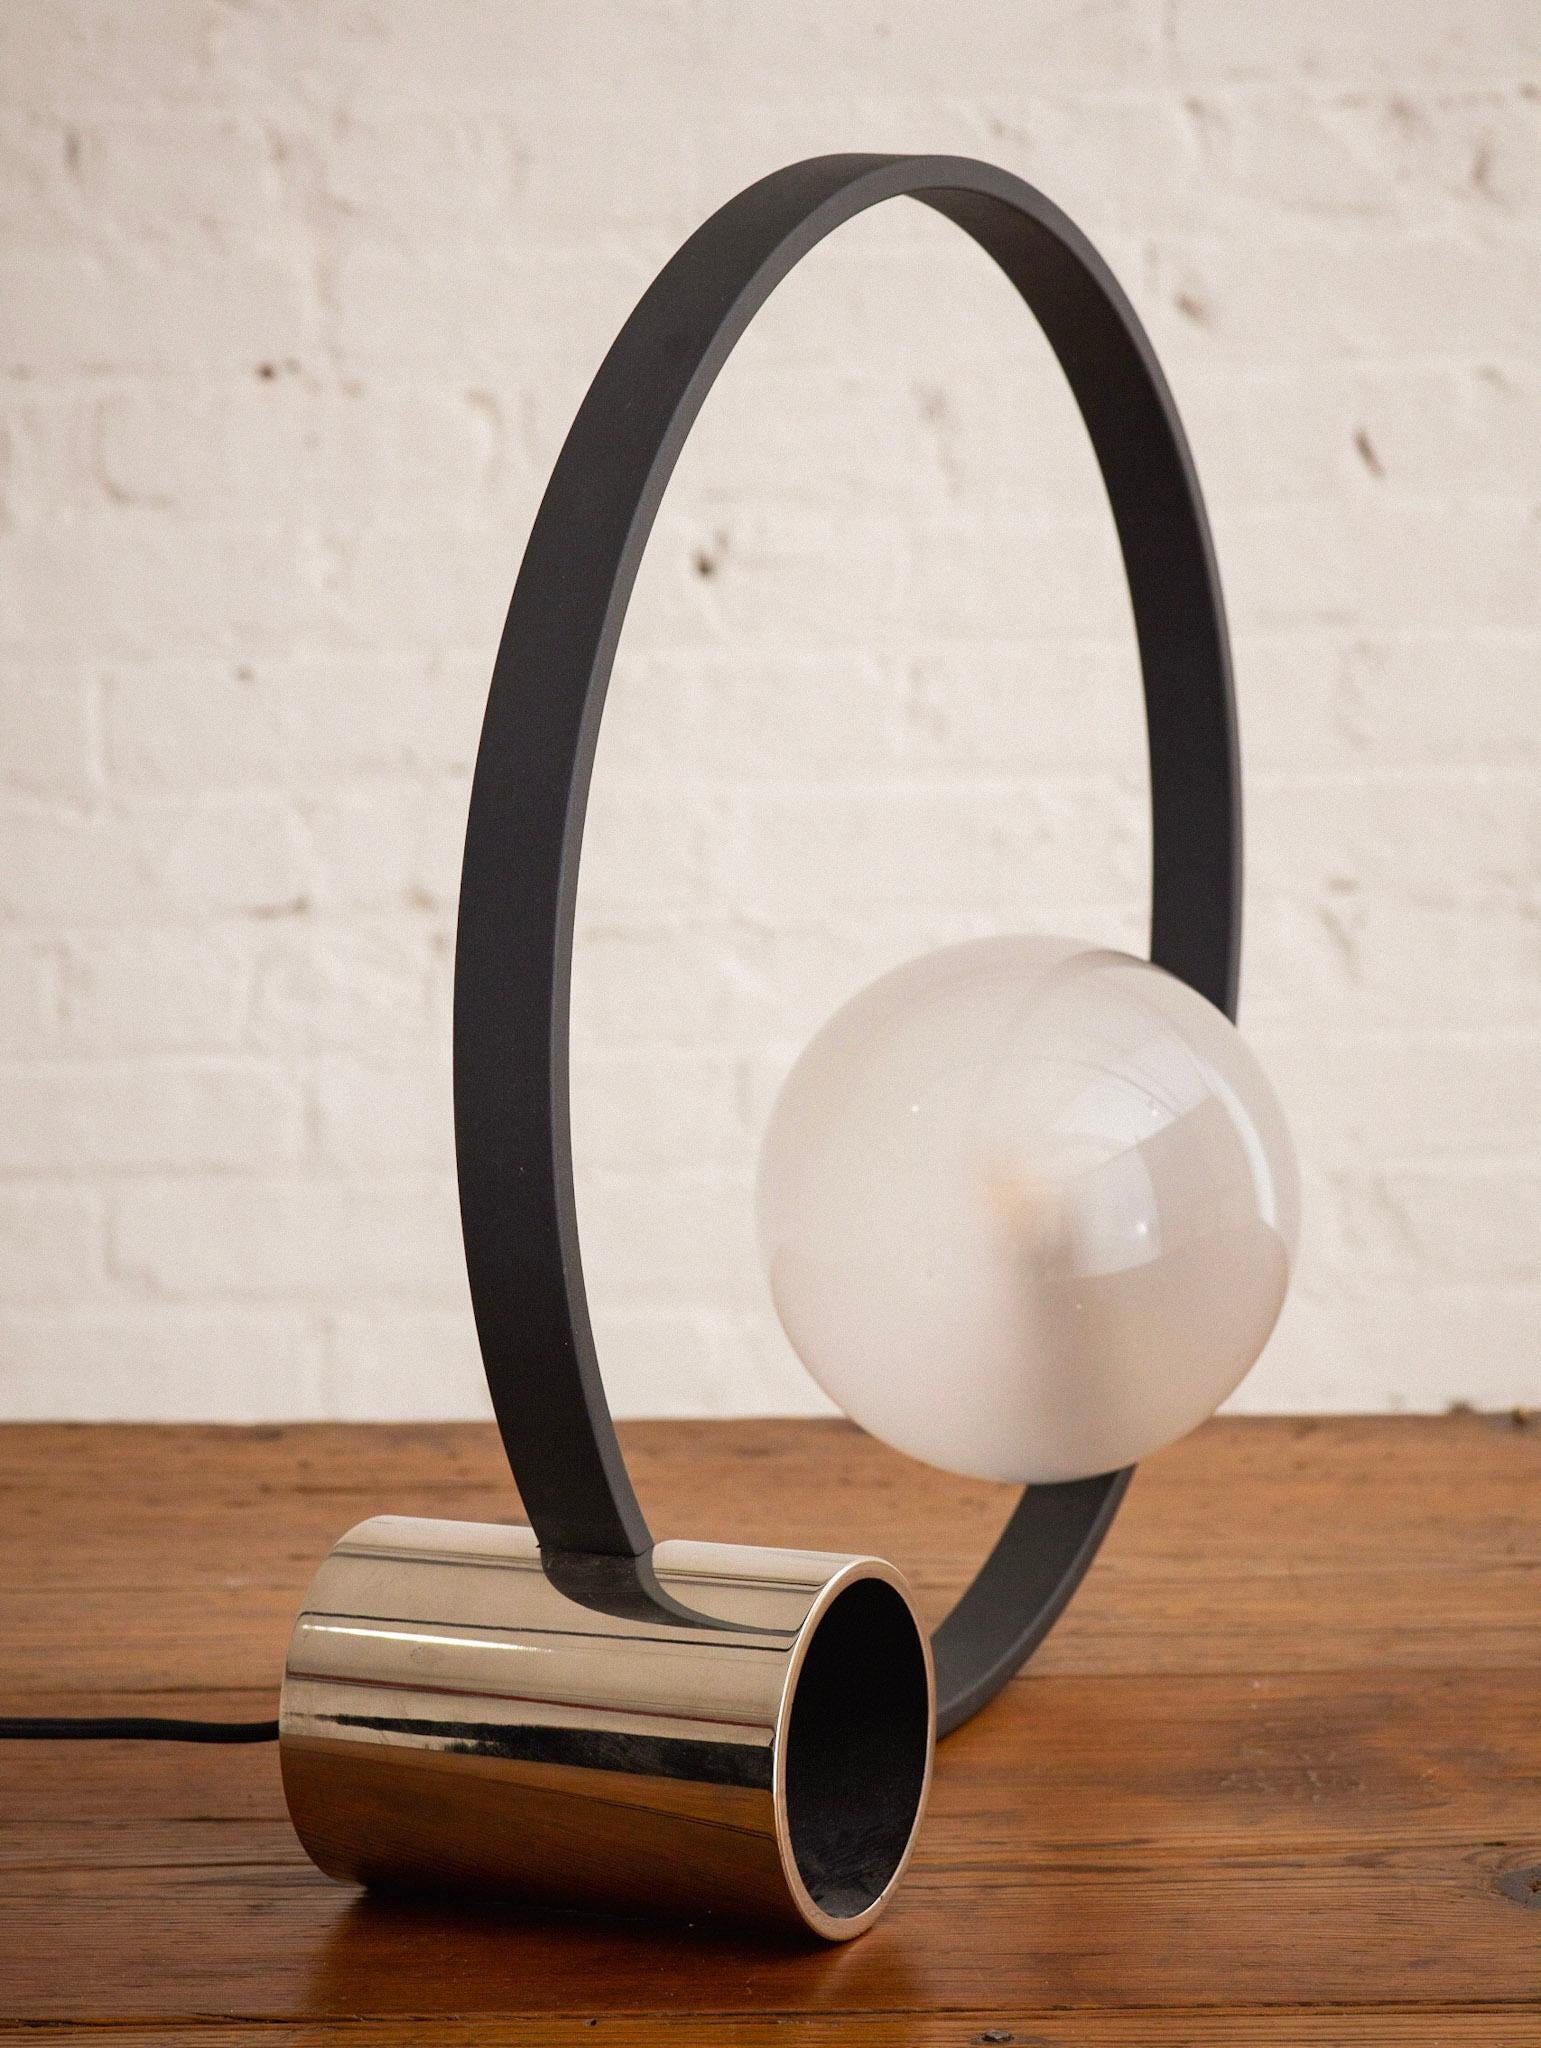 A Memphis style sculptural lamp in glass, metal and chrome. A chrome base supports a round metal frame and glass glove. Marked Ul LLC 2013.